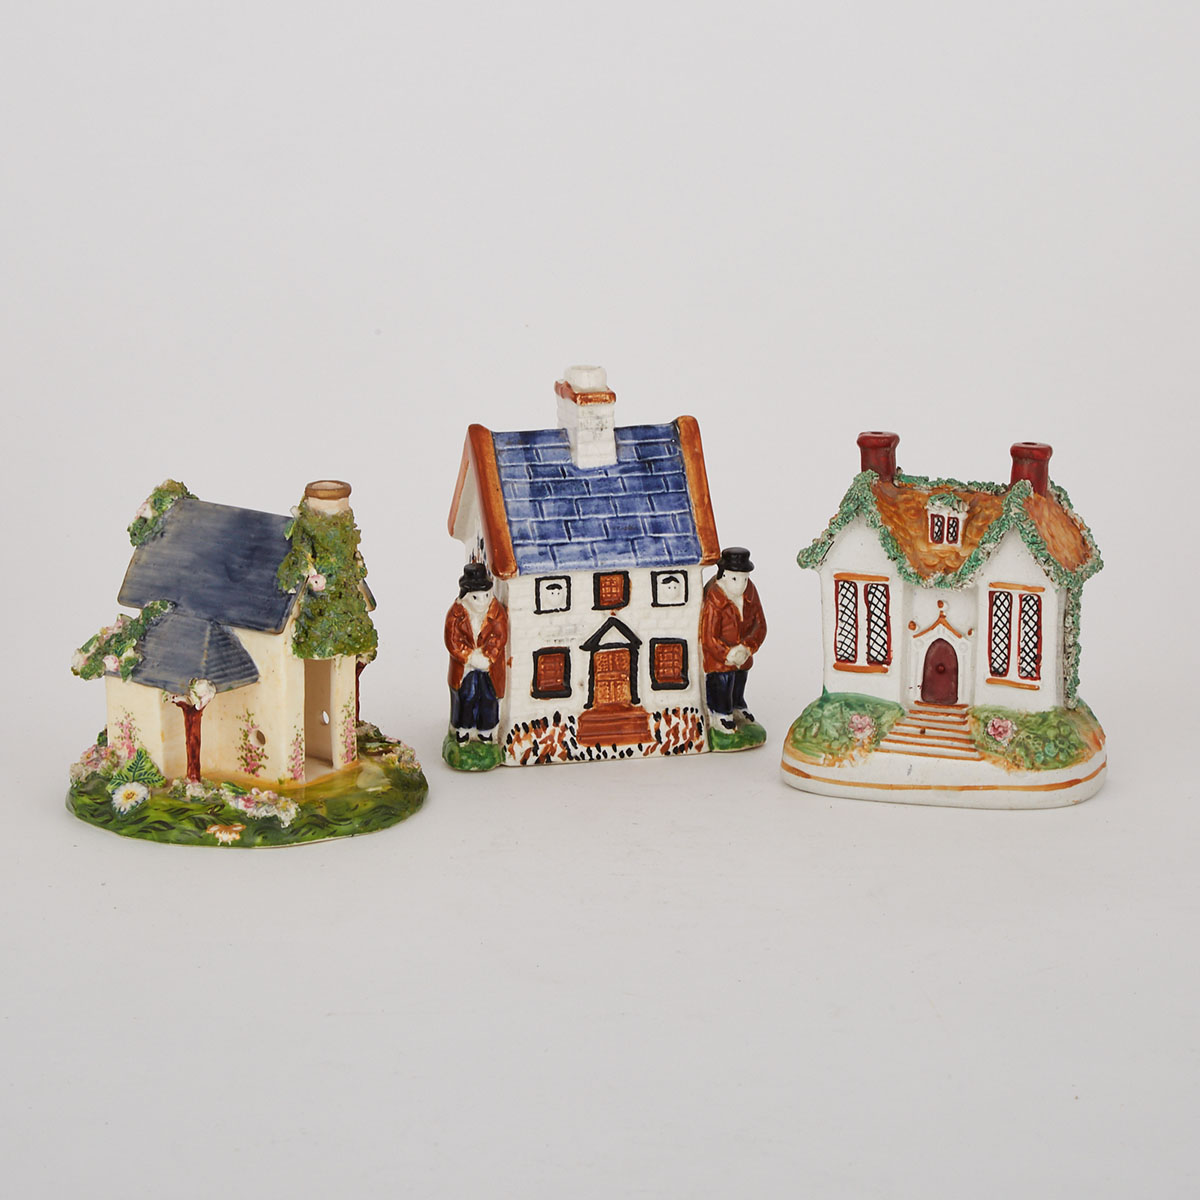 Two Staffordshire Pottery Cottage Banks and a Porcelain Pastille Burner, 19th century